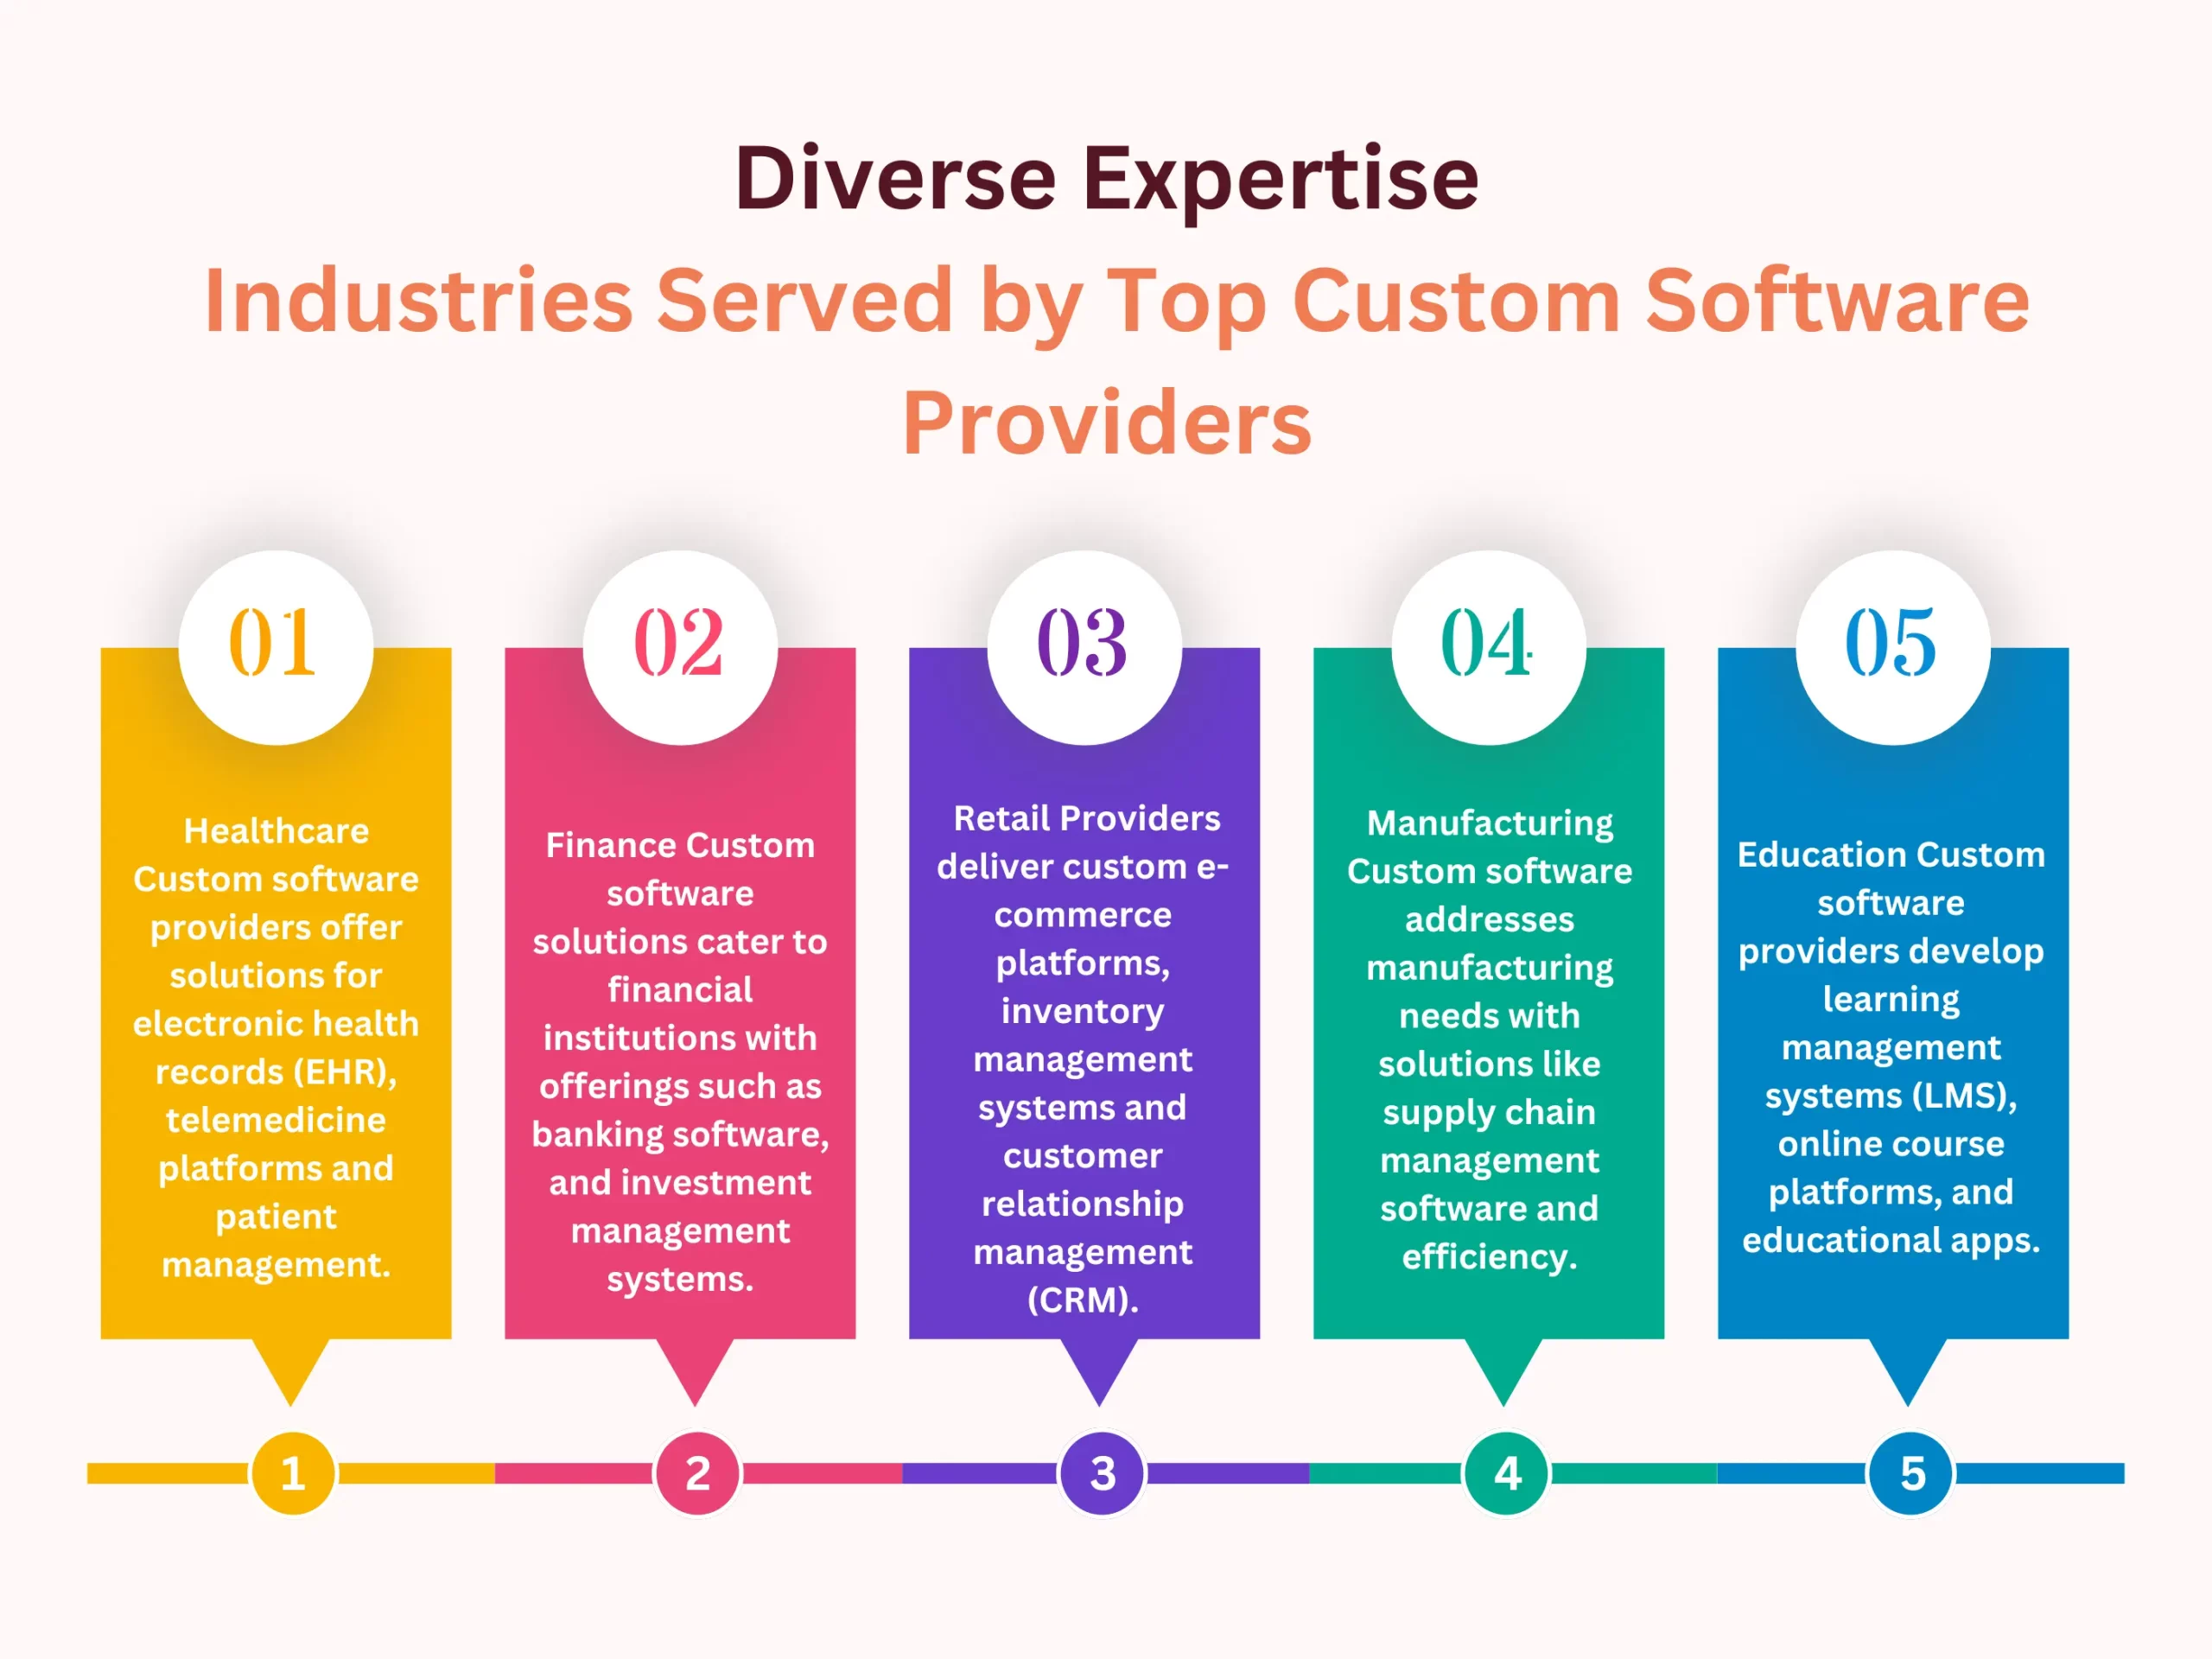 Diverse Expertise Industries Served by Top Custom Software Providers